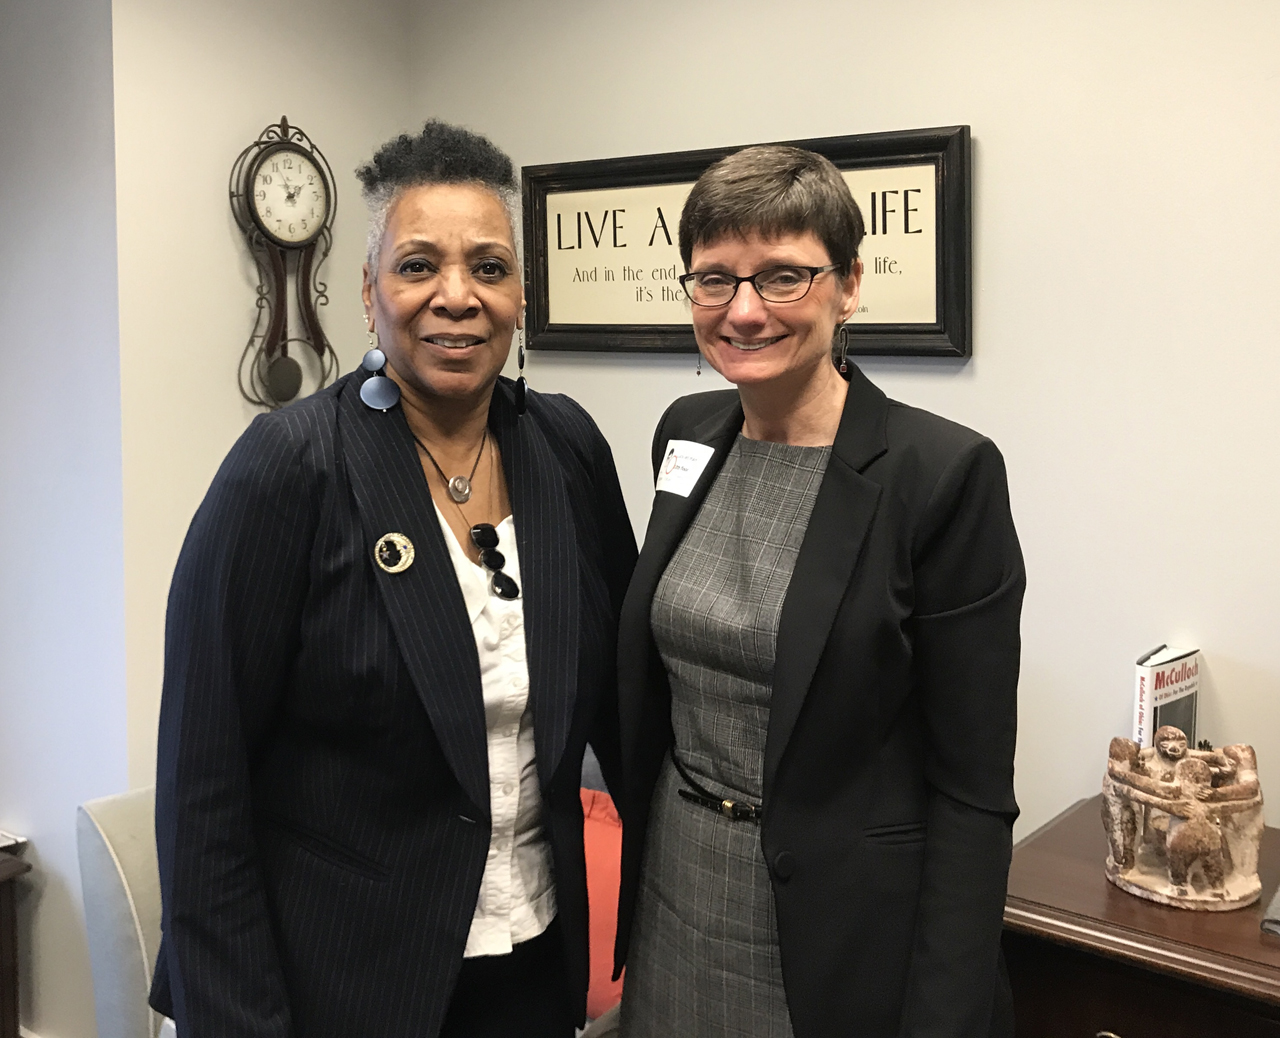 Rep. Ingram with Lucy Gettman, Executive Director of Women in Government